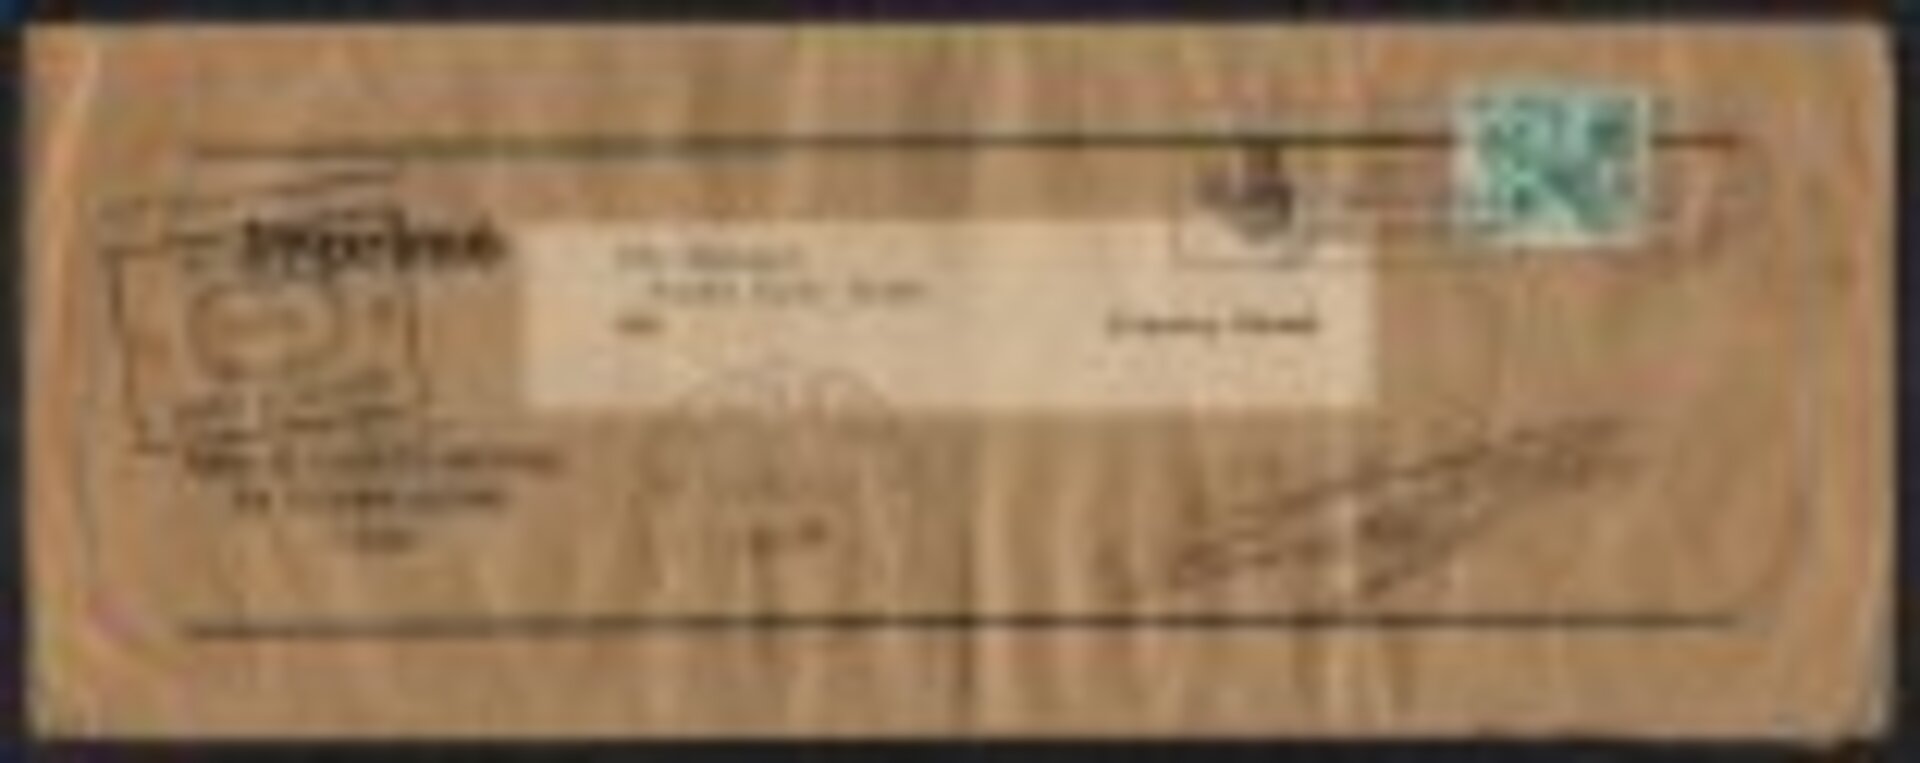 Cover with PASS U.S. ARMY EXAMINER marking 